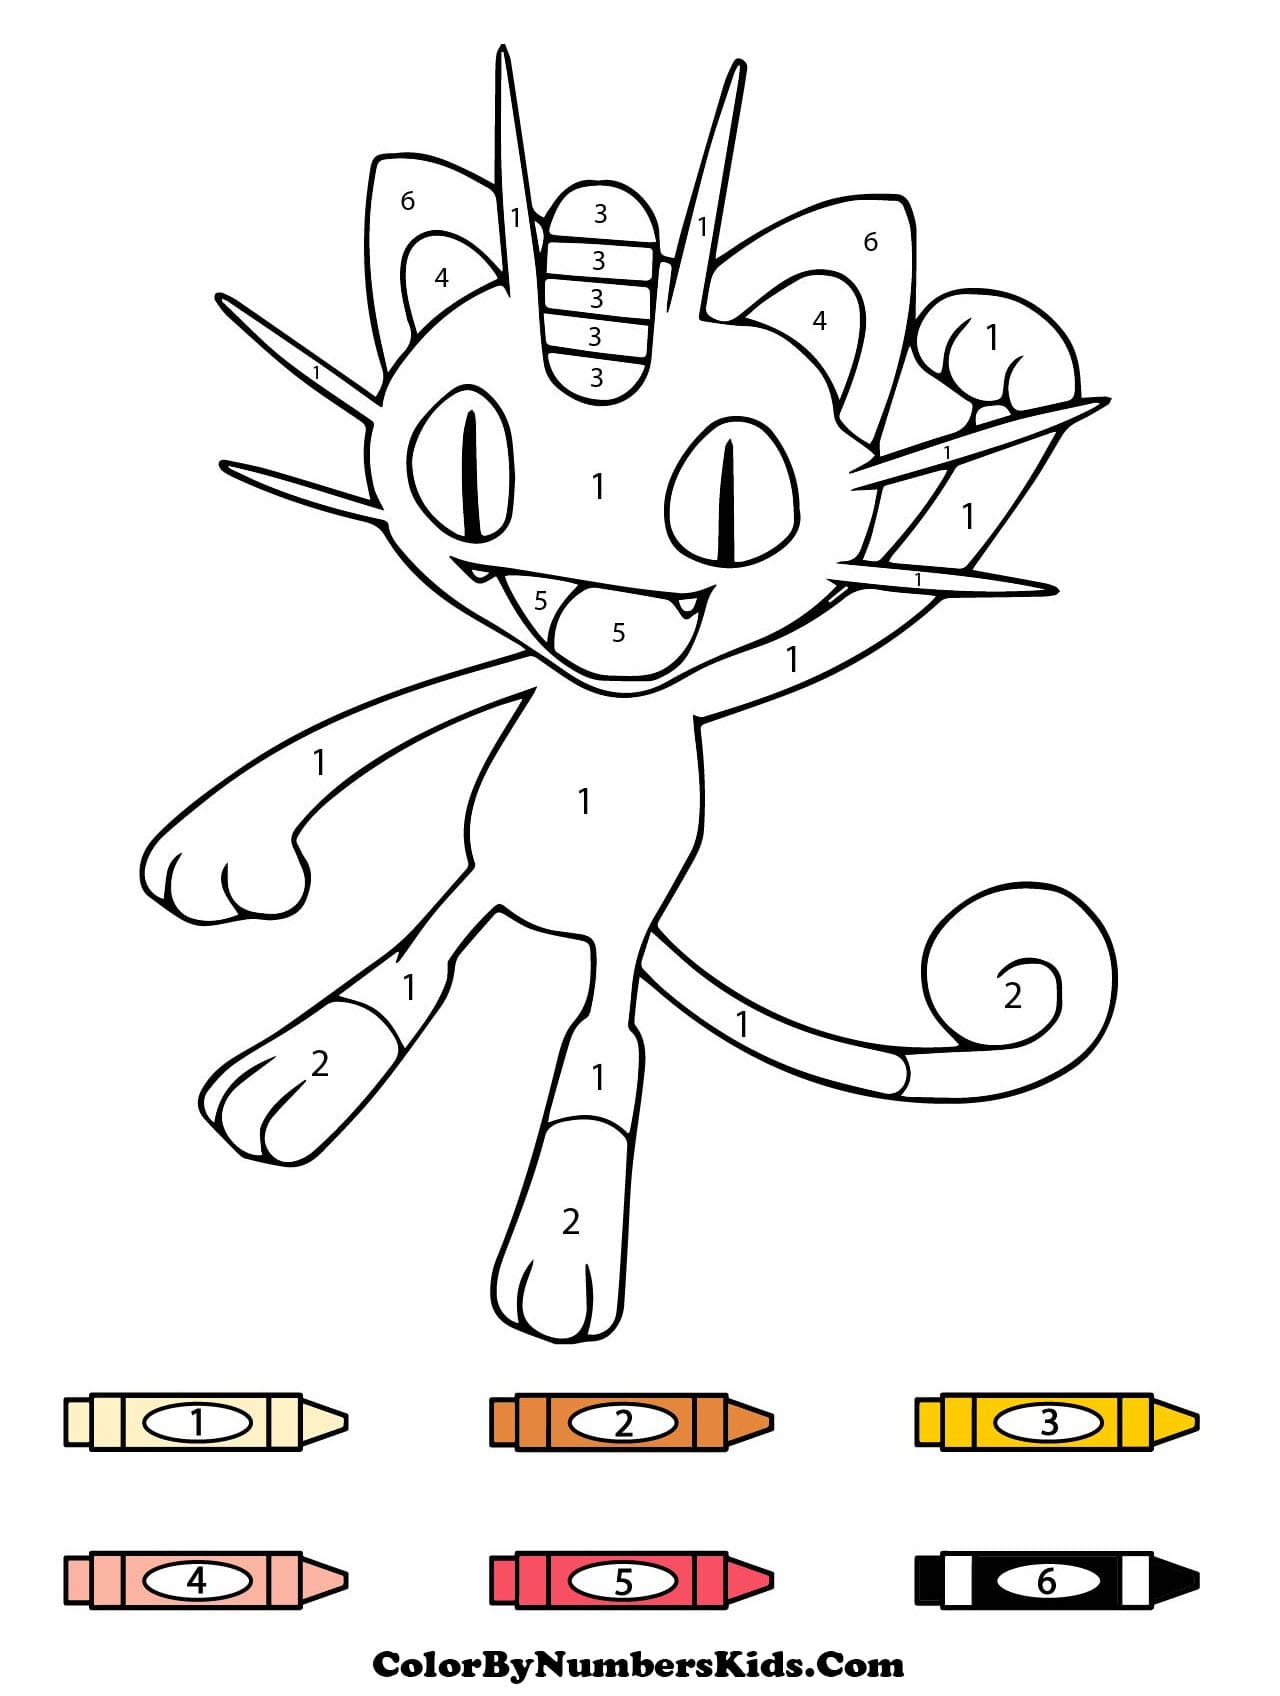 Meowth Pokemon Color By Numbers